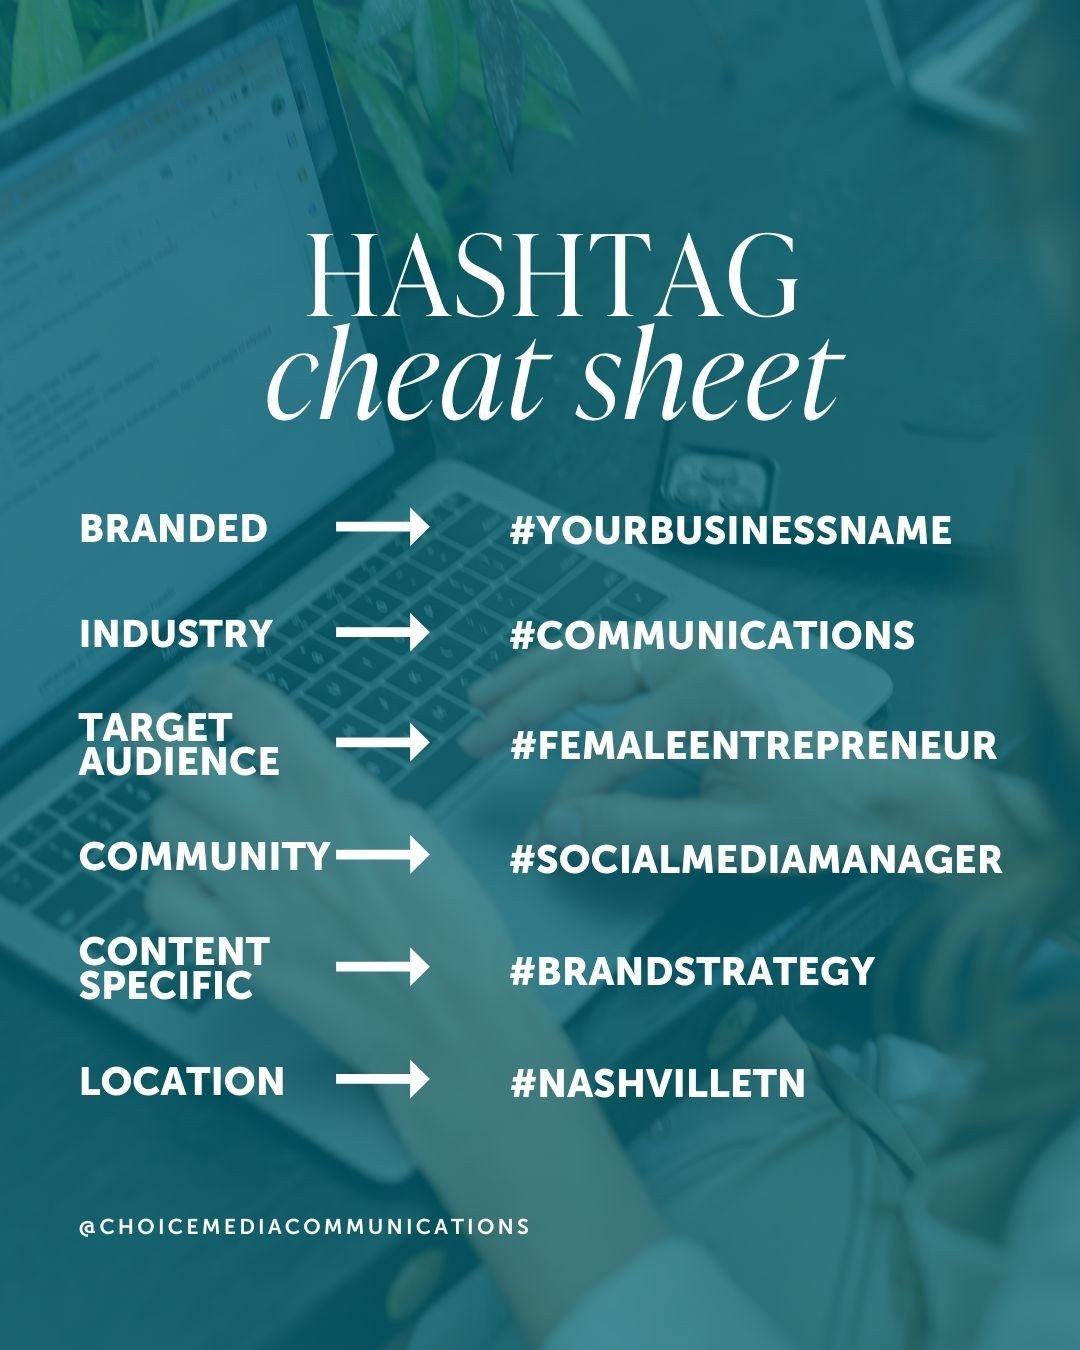 SAVE THIS ⁠
⁠
Whoever said hashtags are out was seriously mistaken. It&rsquo;s all about categorizing your content correctly &mdash; and if you do that, your content will still be discoverable even  a month from now. ⁠
⁠
Use this quick guide as a gui